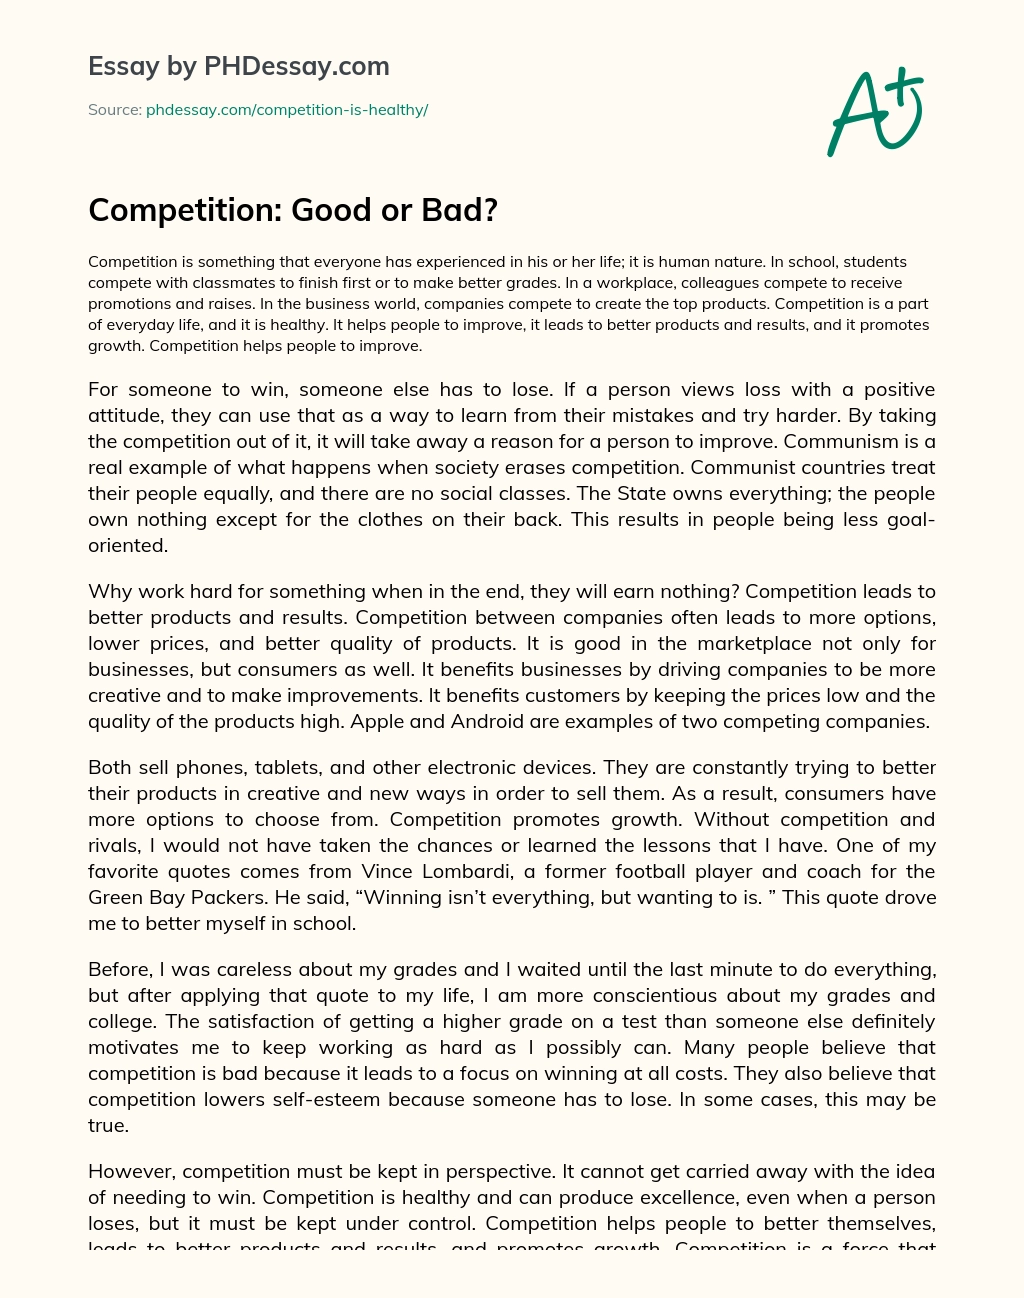 Competition: Good or Bad? essay